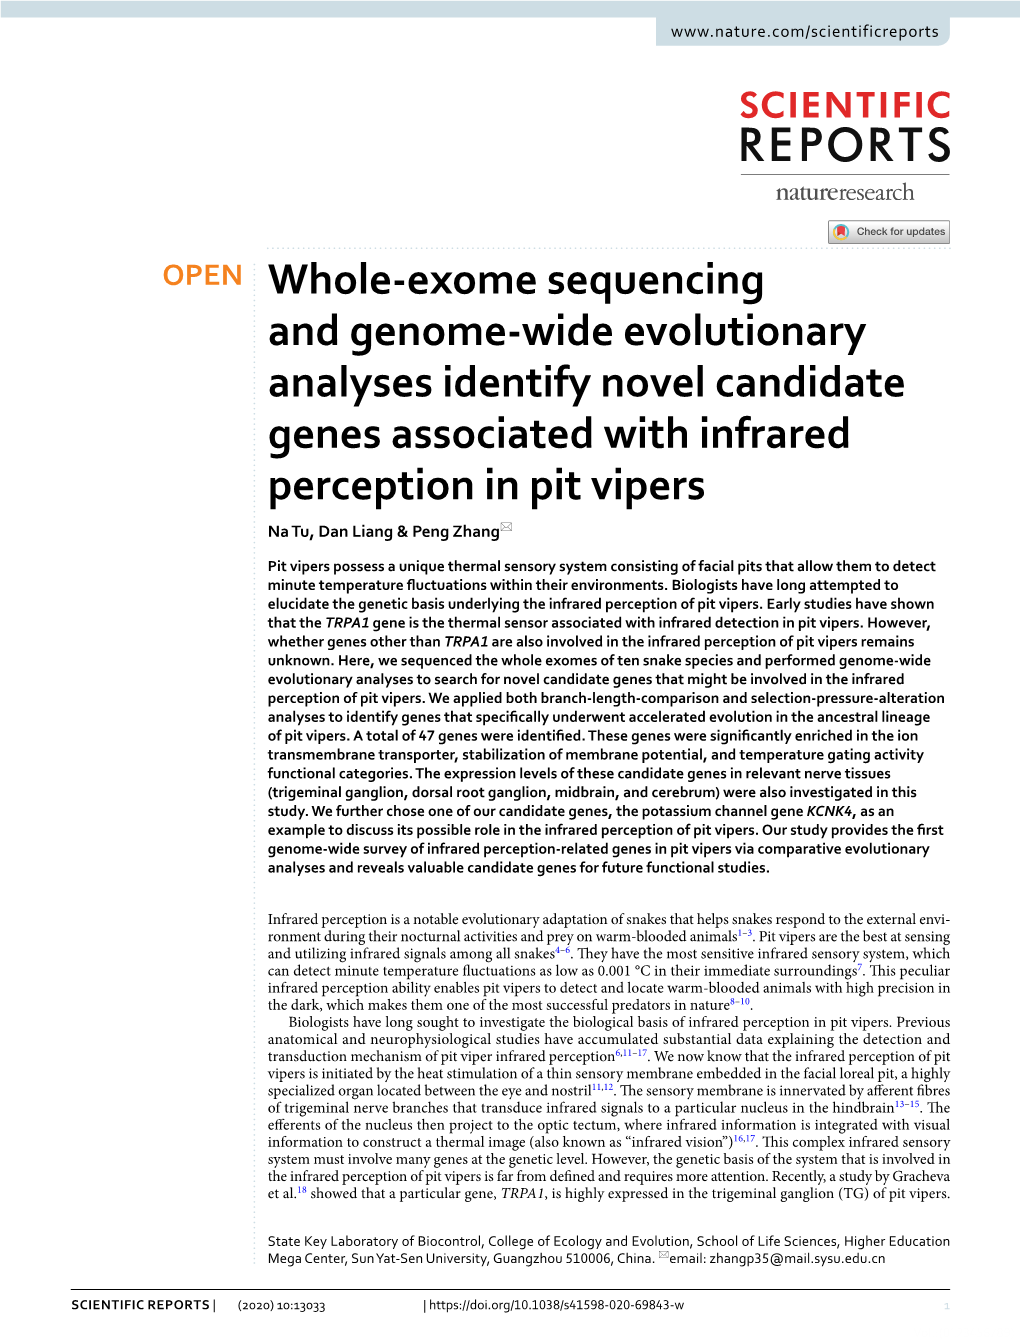 Whole-Exome Sequencing and Genome-Wide Evolutionary